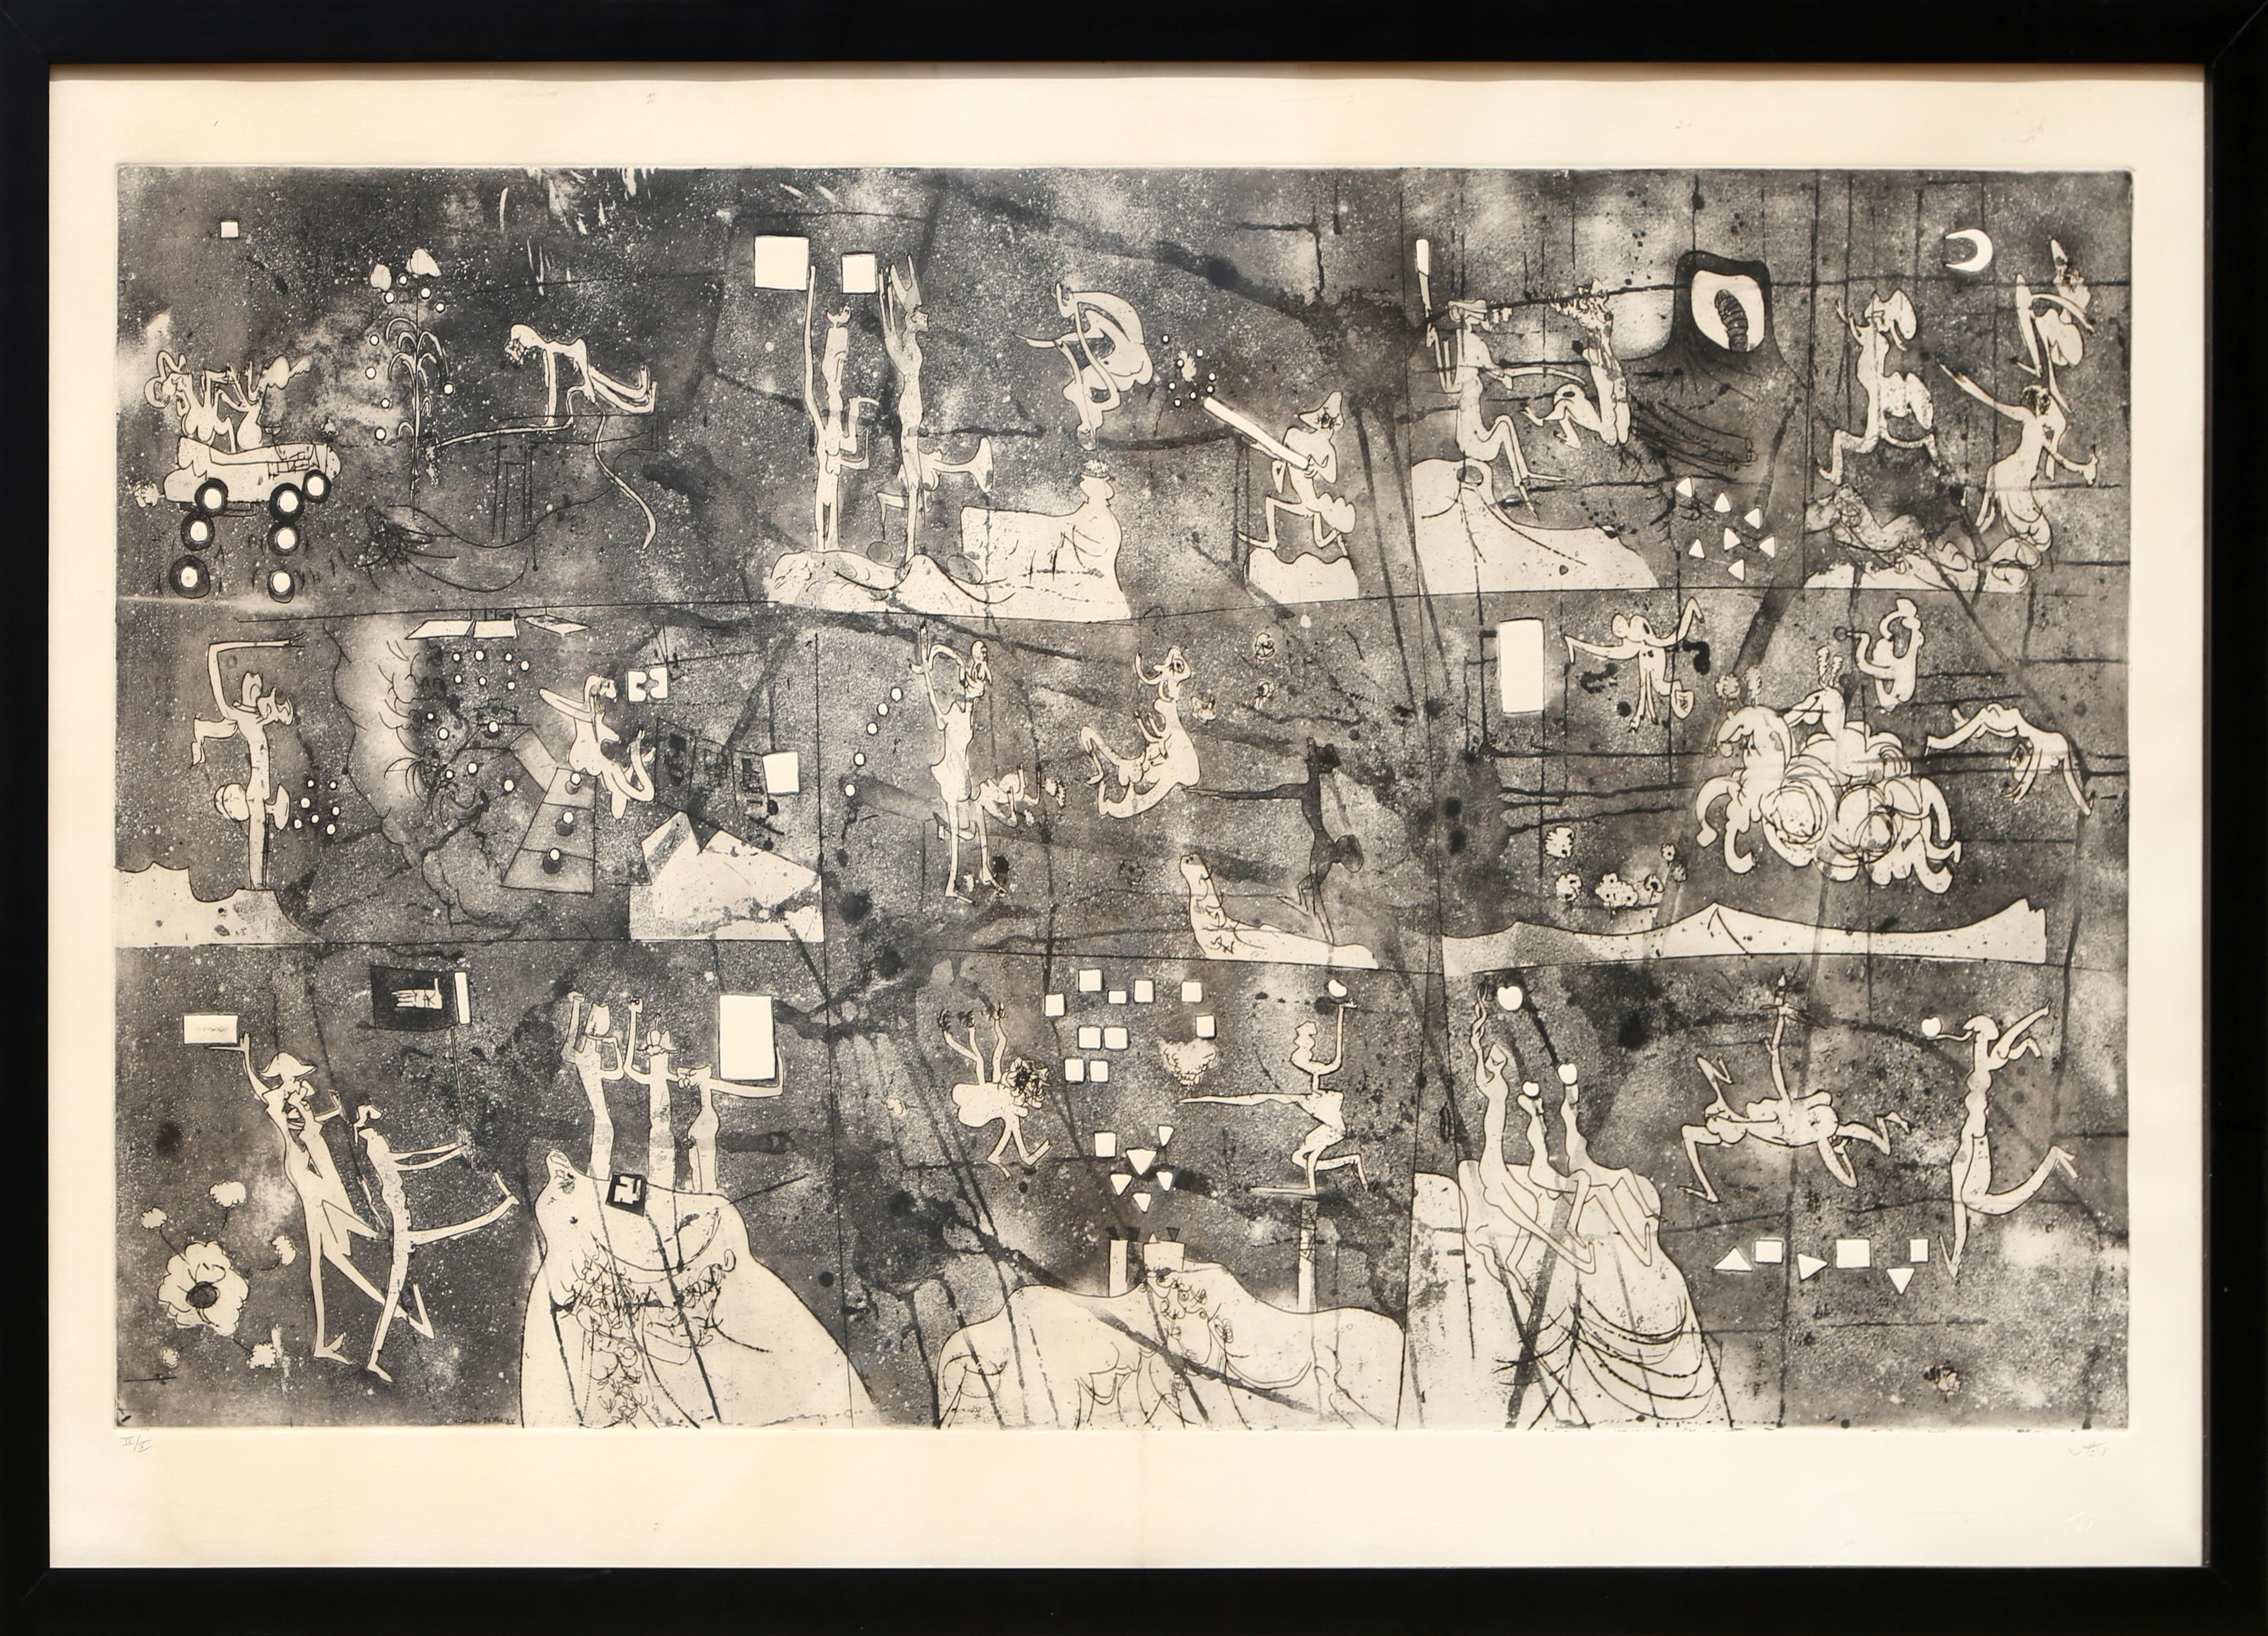 An early large-scale work by Chilean artist Roberto Matta. In this black-and-white surrealist piece, various figures can be seen in various acts. Signed and numbered in pencil. This edition is not from the Arabic numbered edition of 40.

La Une a